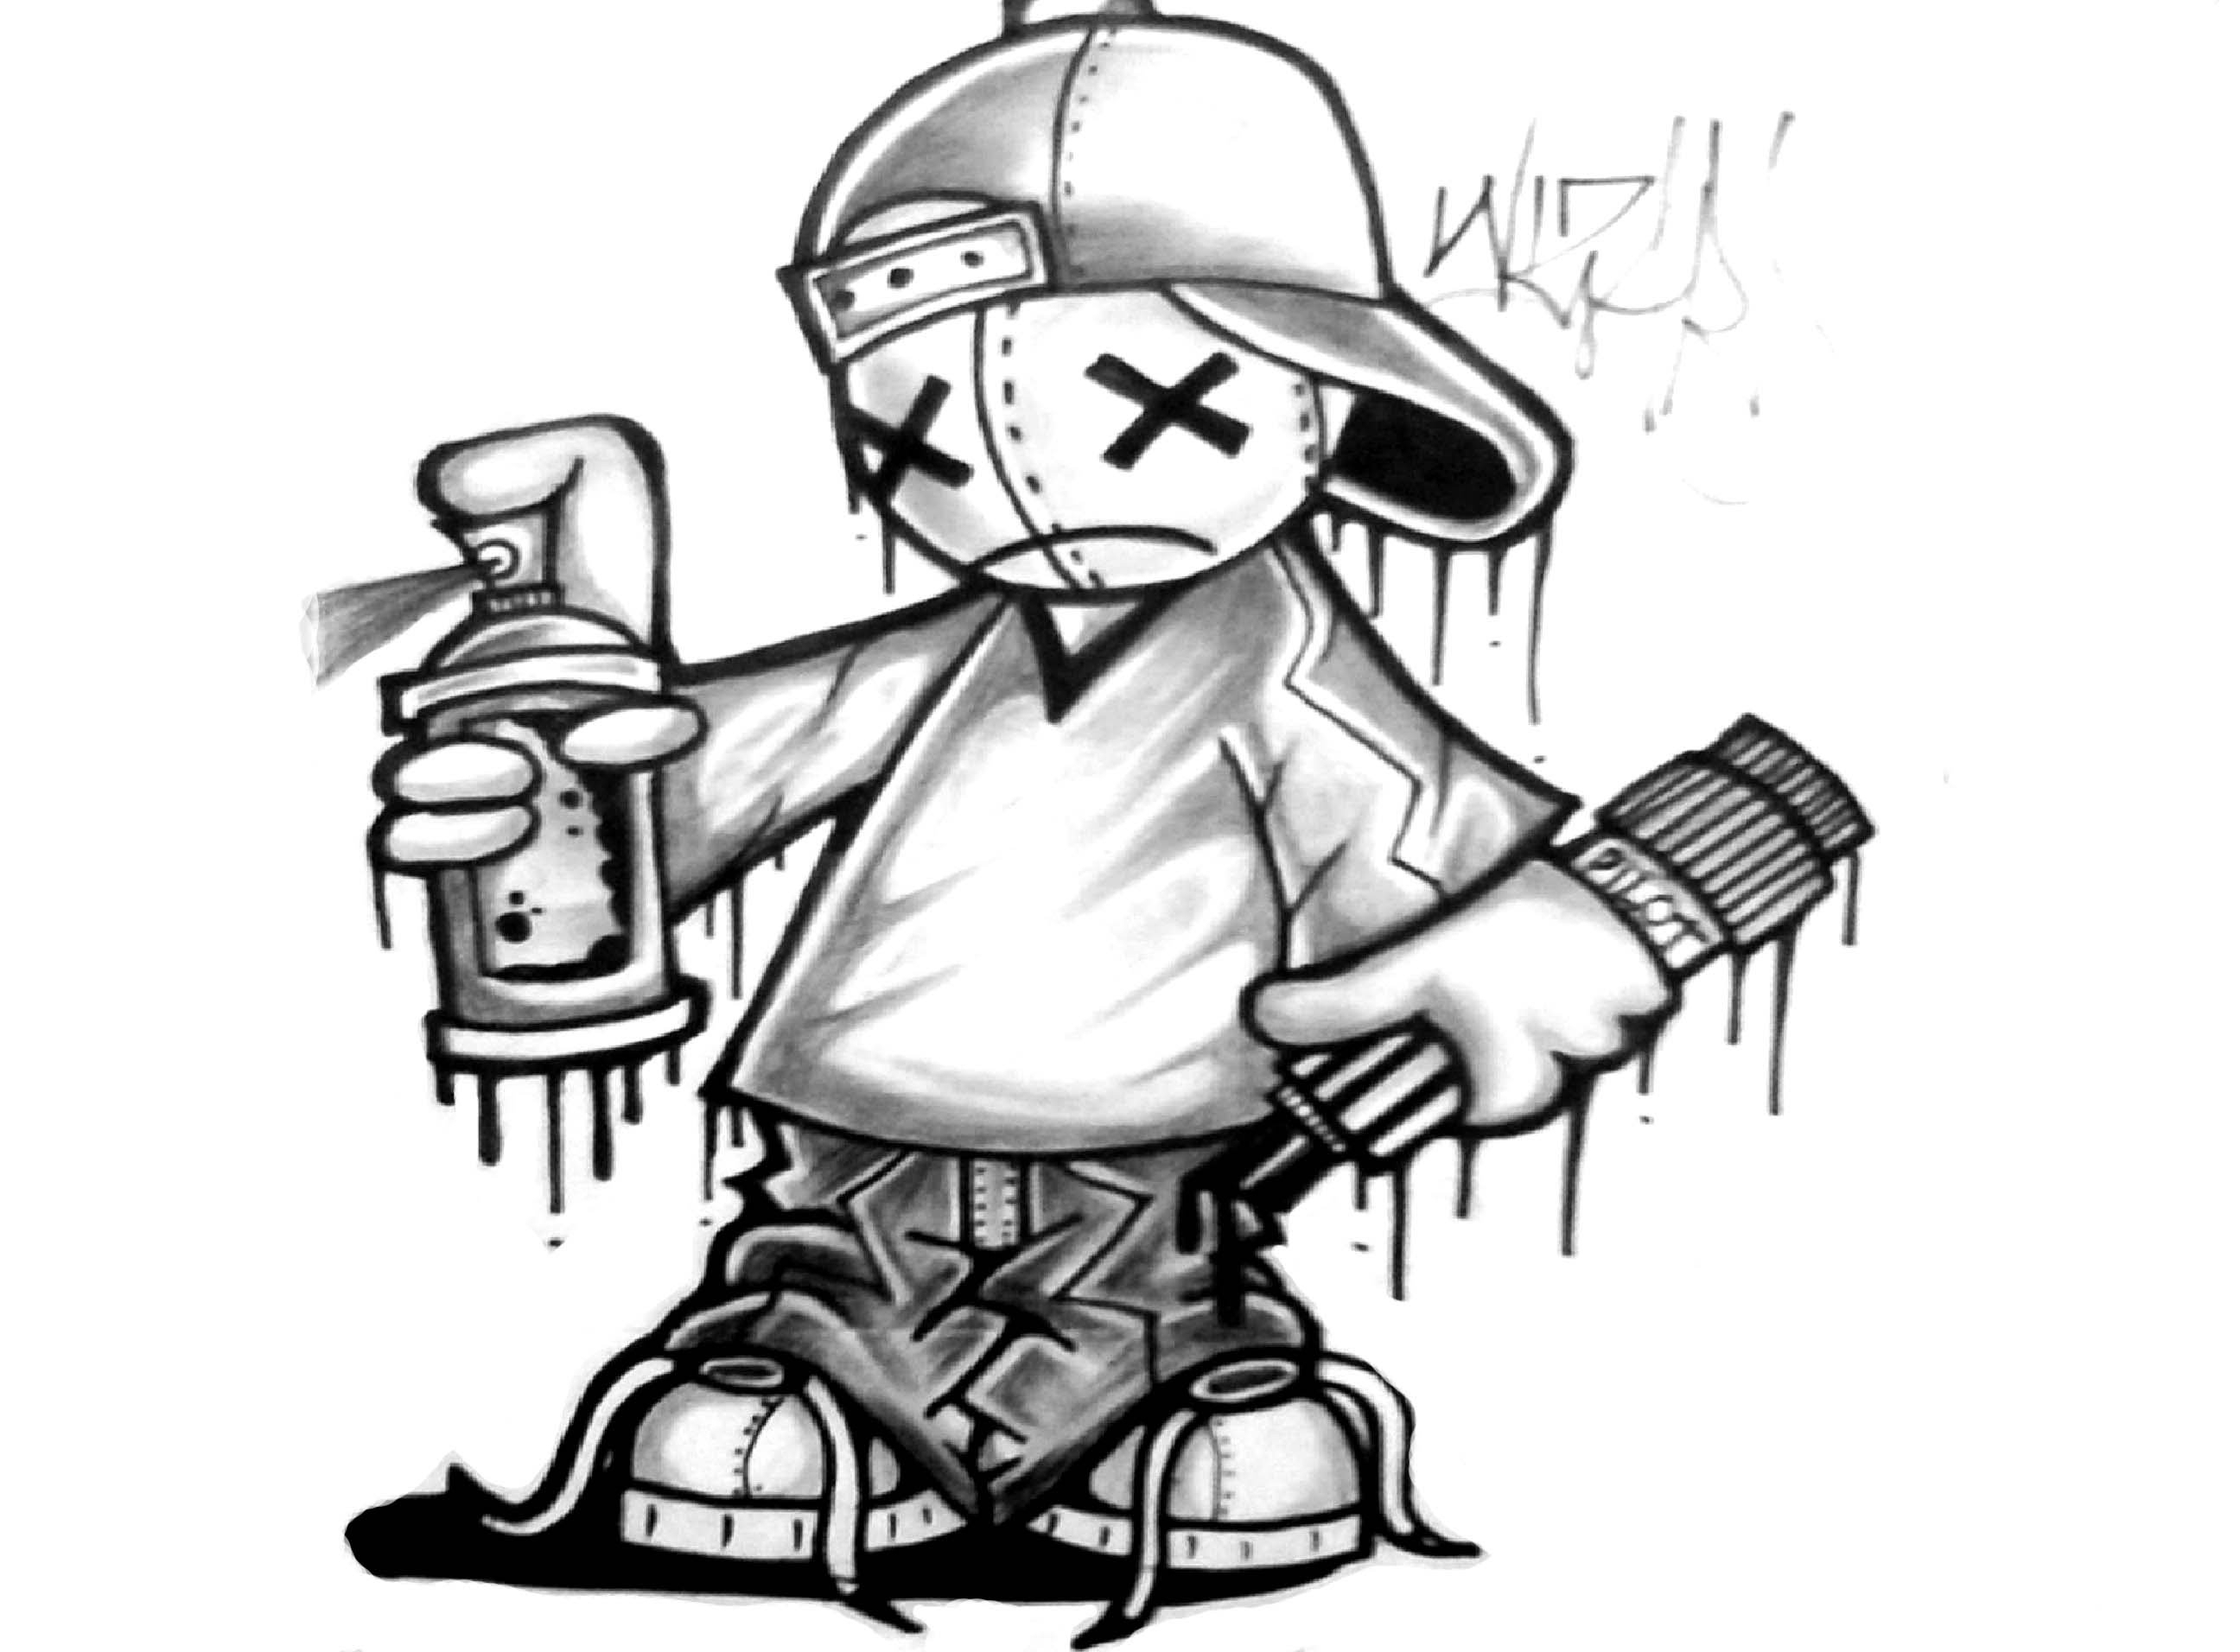 2592x1912 Graffiti Character Sketches Sketches Of Graffiti Characters Speed...